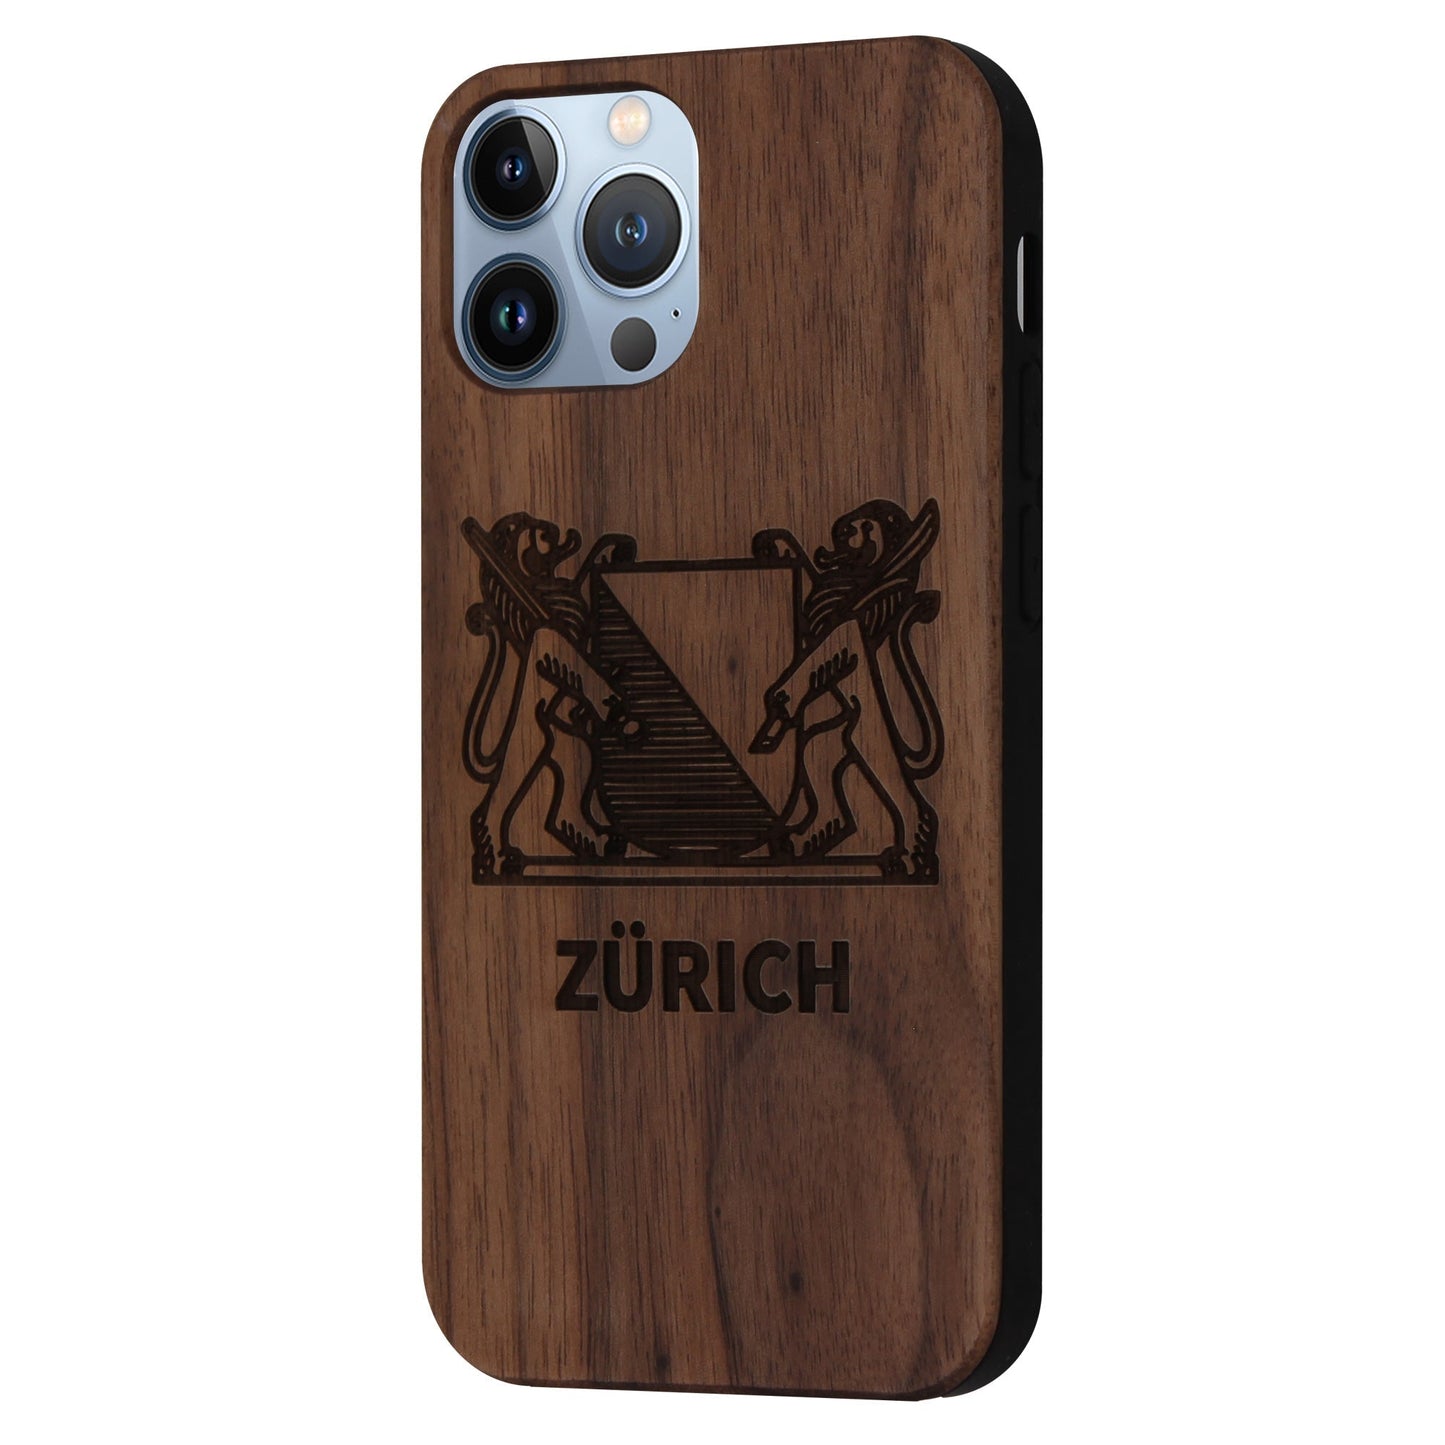 Zurich Coat of Arms Eden Case made of walnut wood for iPhone 14 Pro Max